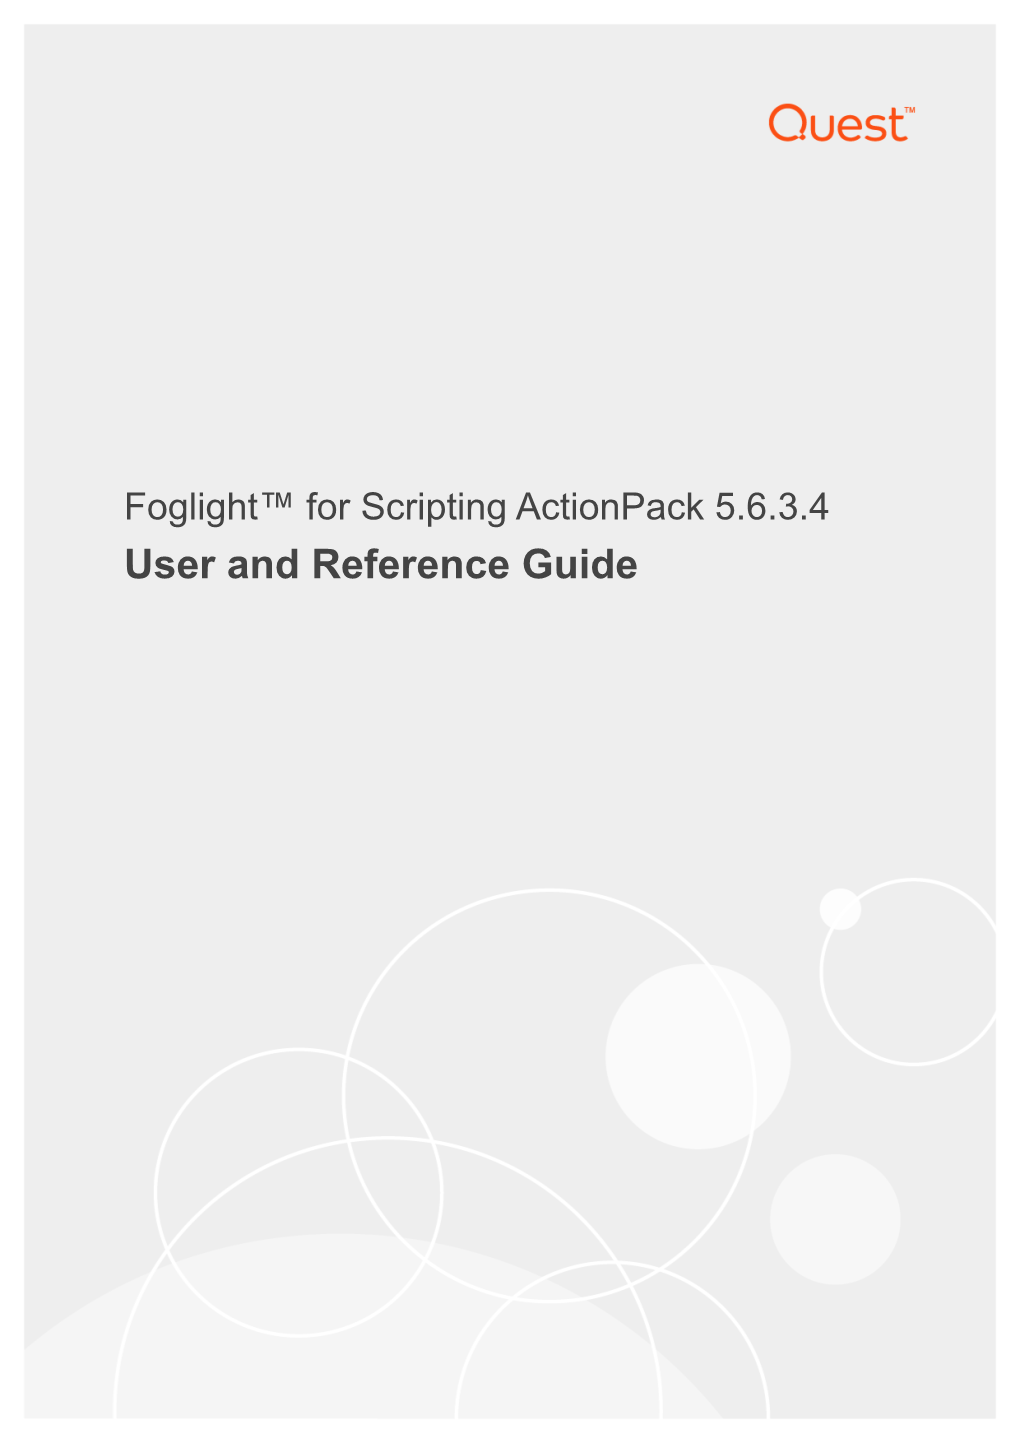 Foglight for Scripting Actionpack User and Reference Guide Updated - April 2017 Foglight Version - 5.7.5.8 Cartridge Version - 5.6.3.4 Contents